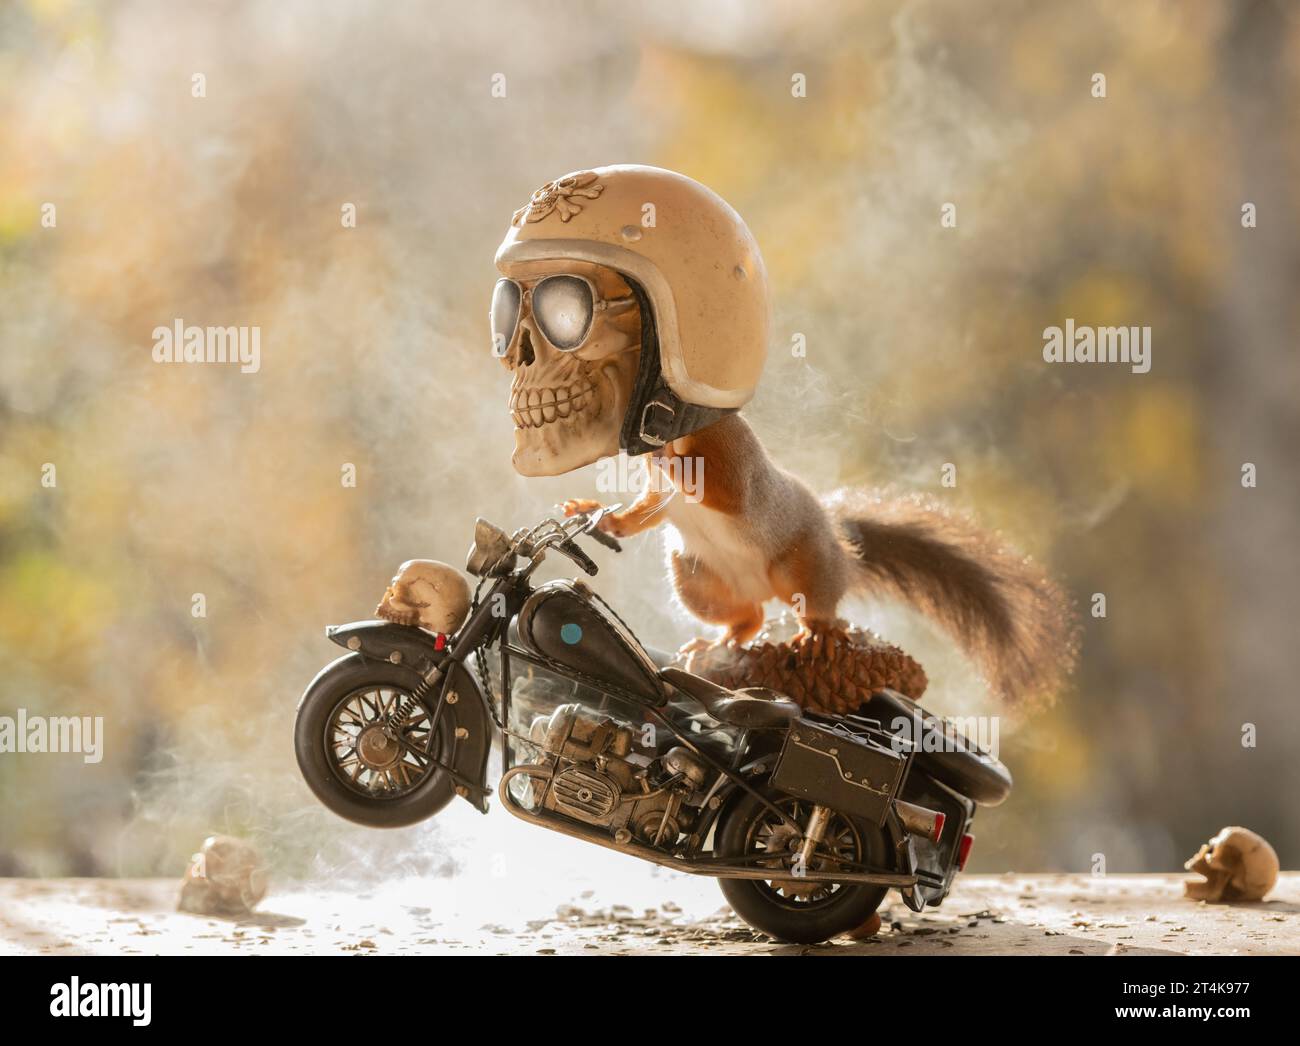 Red Squirrels on a side bike with a skull Stock Photo